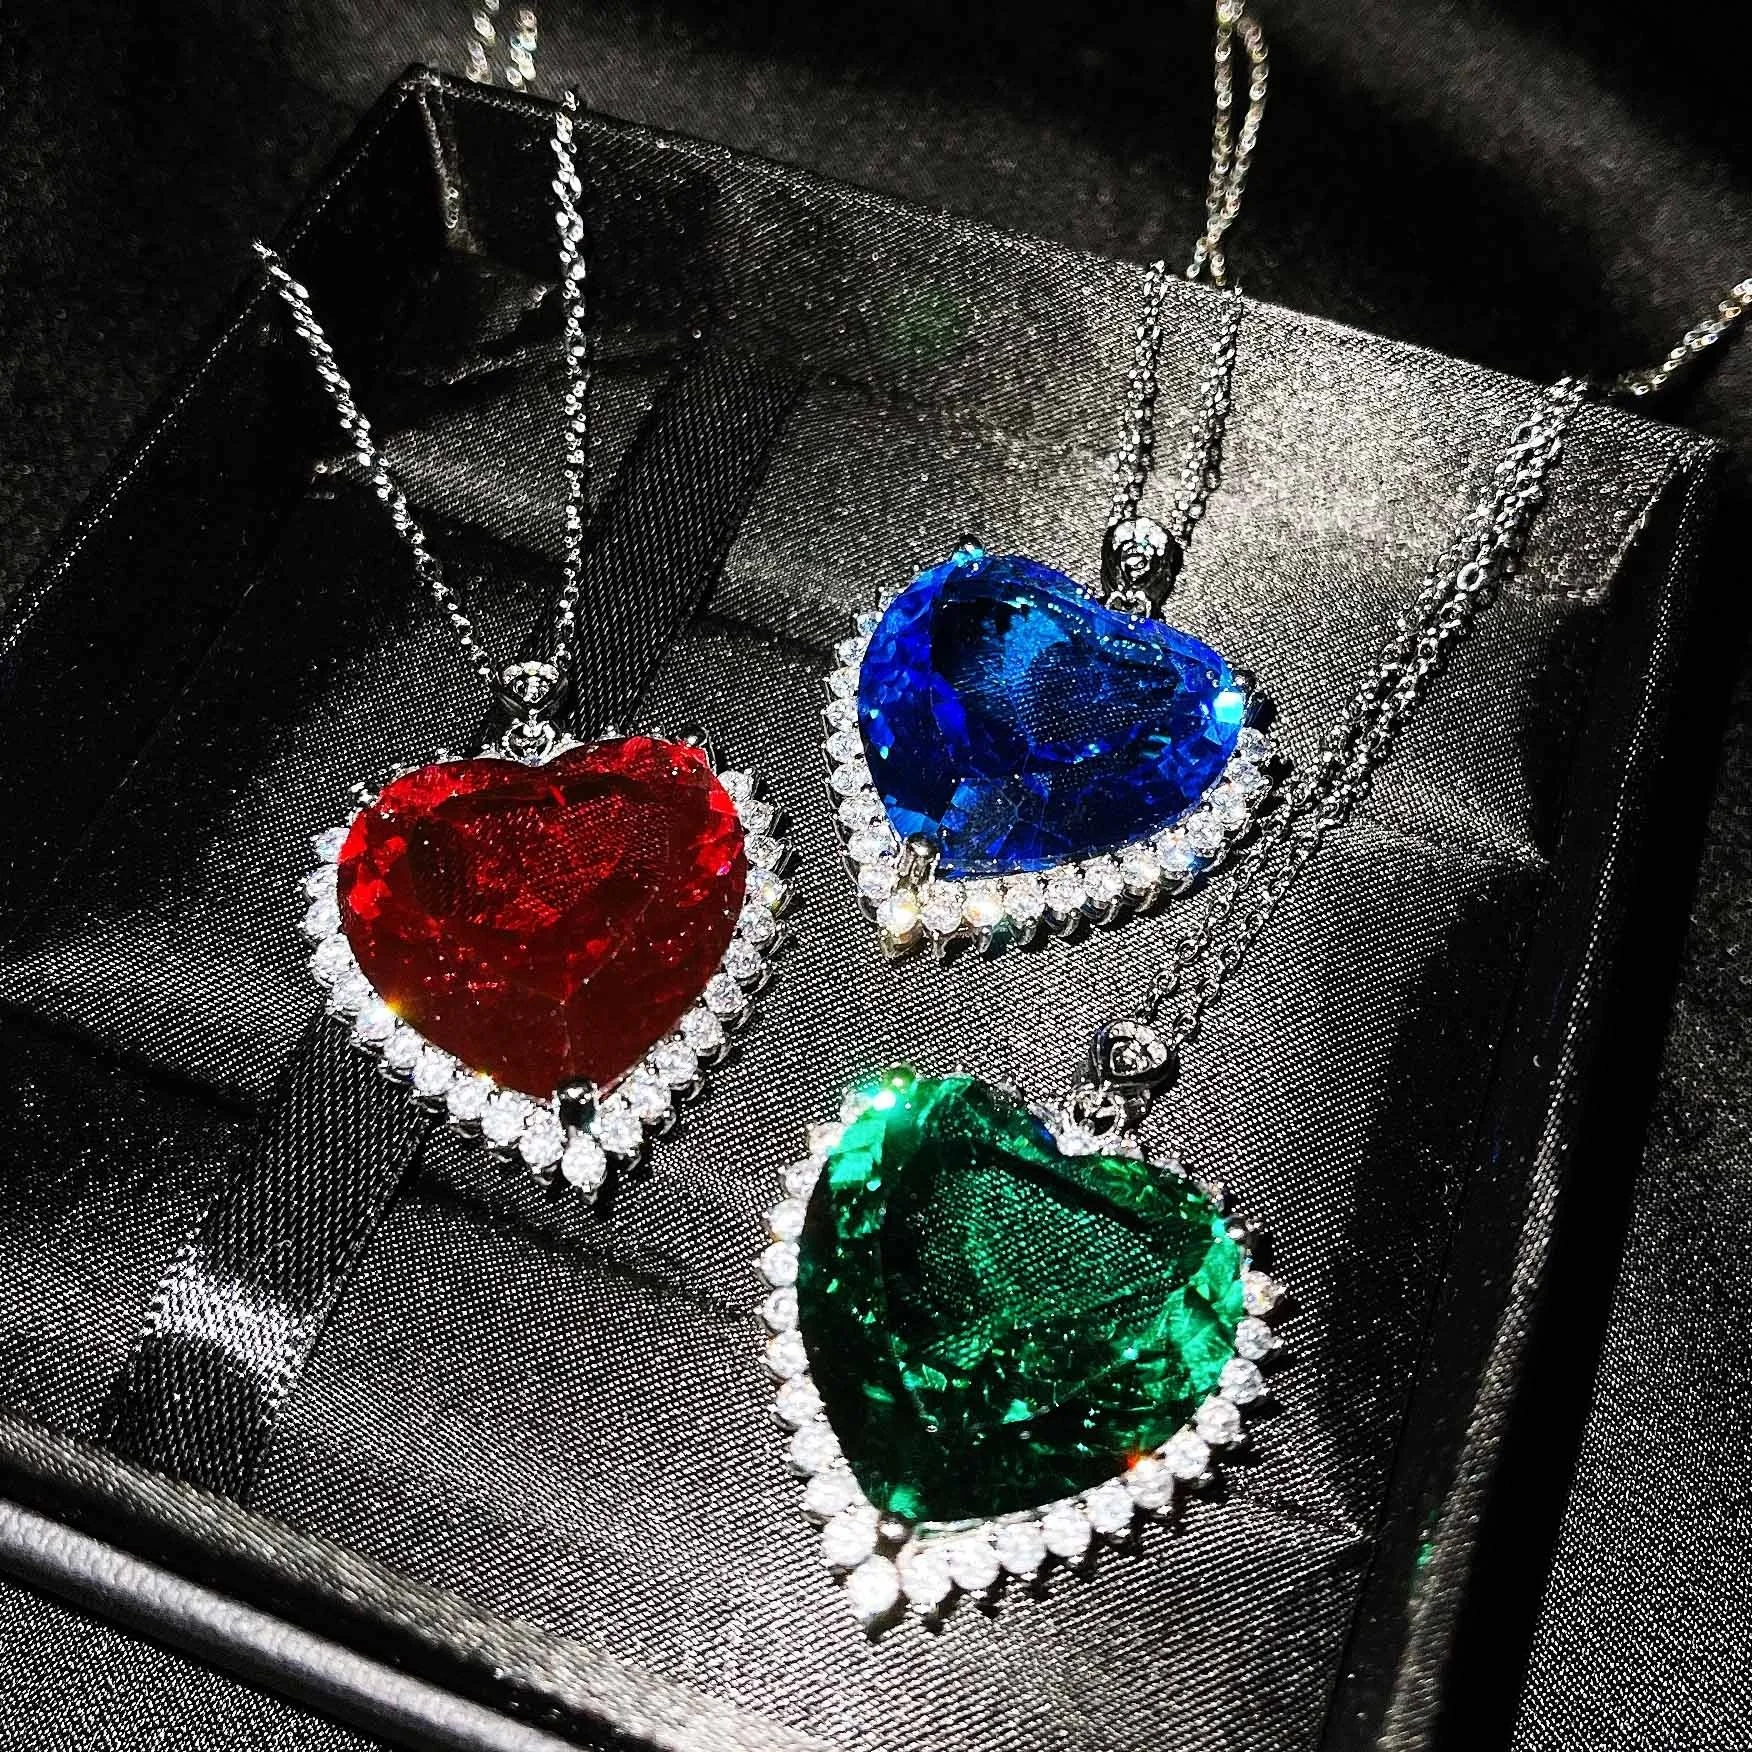 

Luxury Heart of the Ocean Gemstones Necklaces Big Pendants Blue/Red/Green Crystals For Women Girls Gift Wedding Feasts jewelry, Picture shows